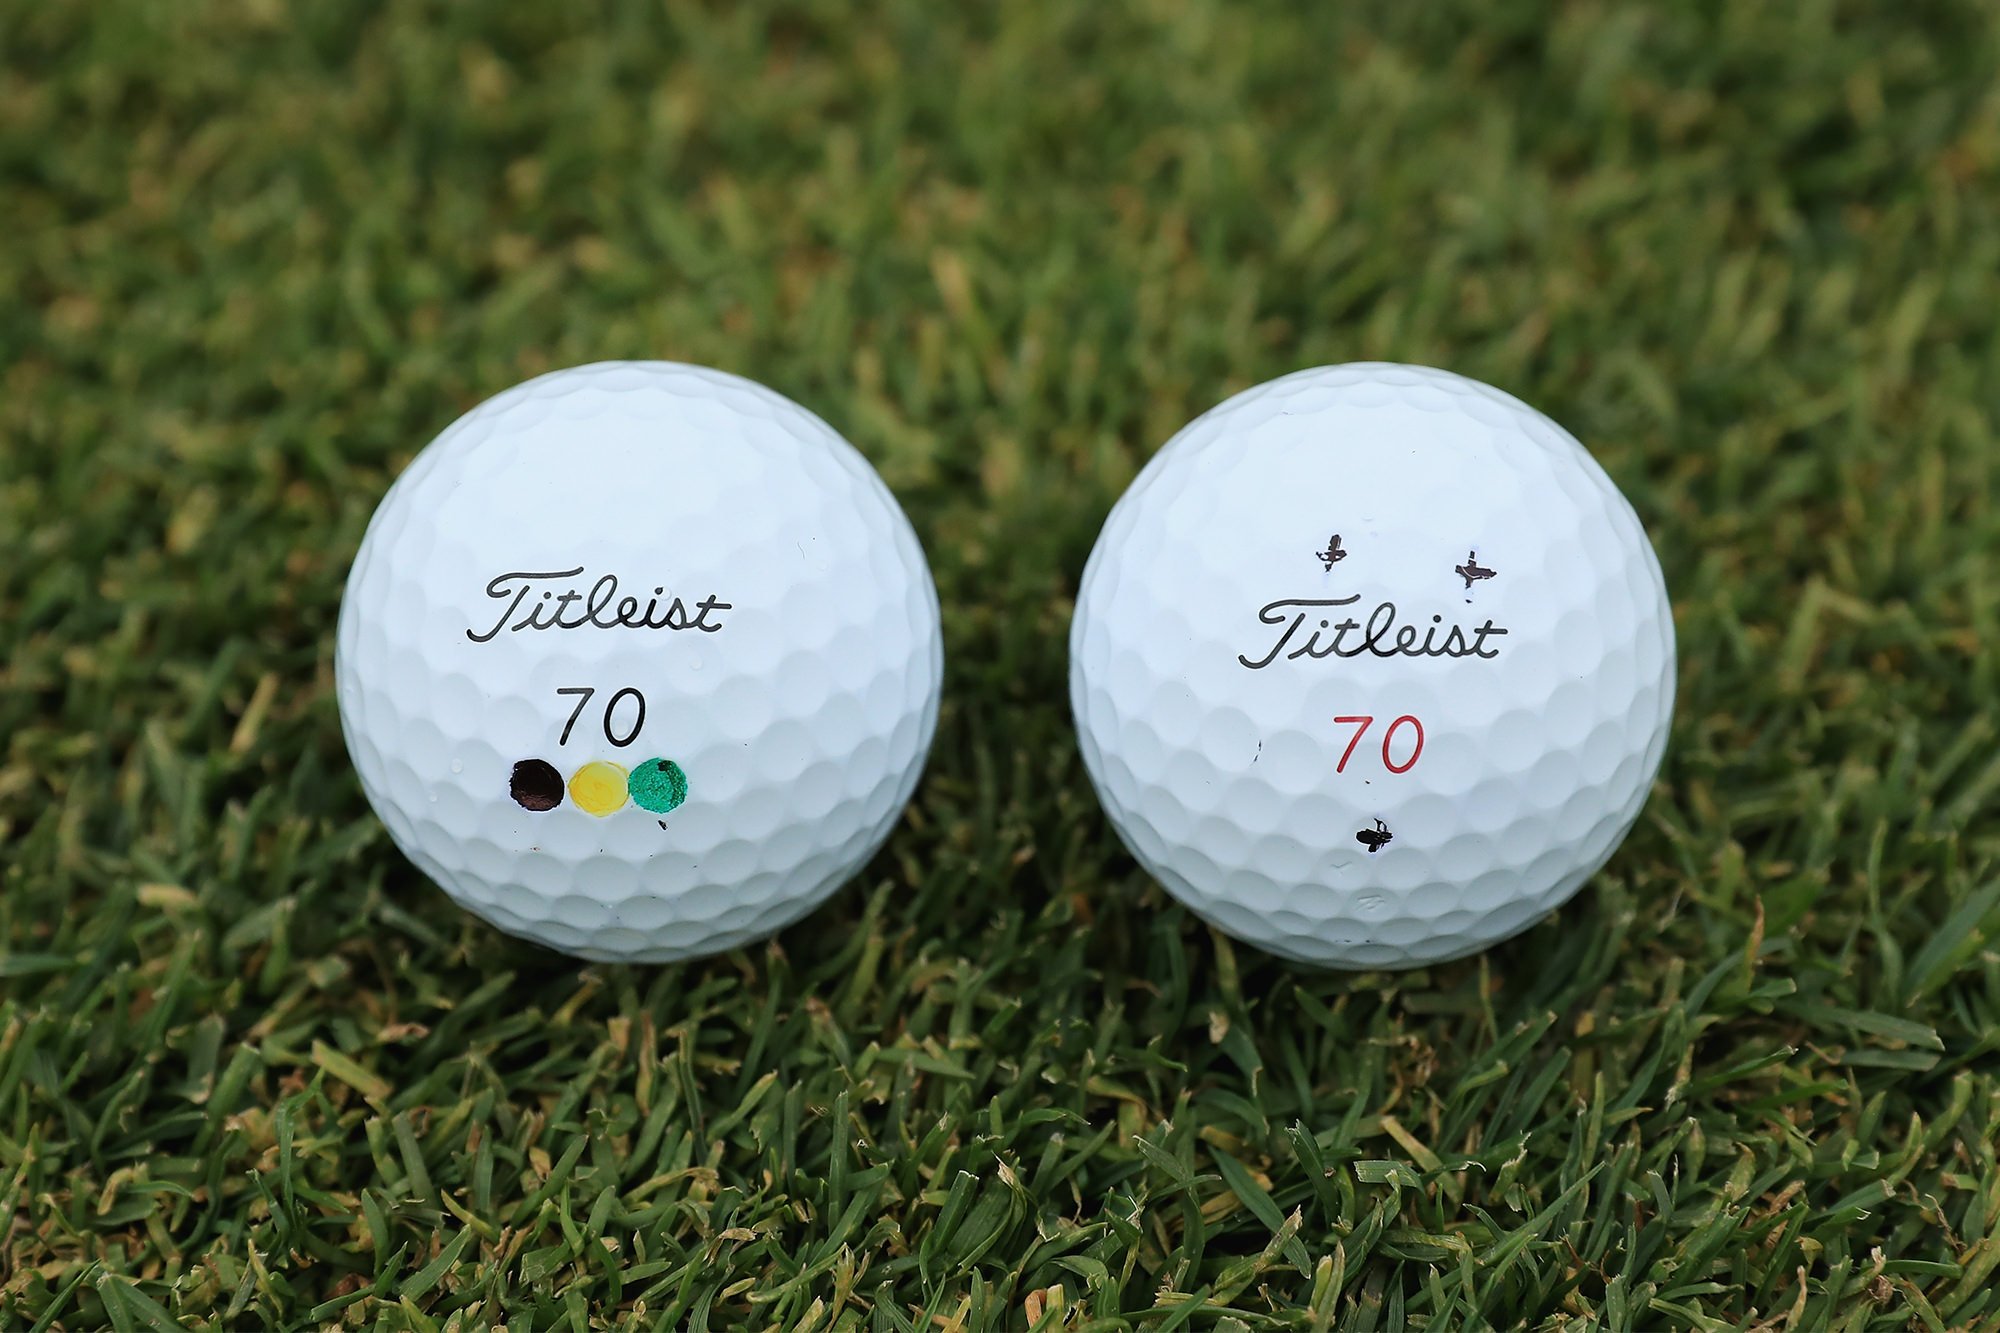 refurbished golf balls playing the wrong ball in match play